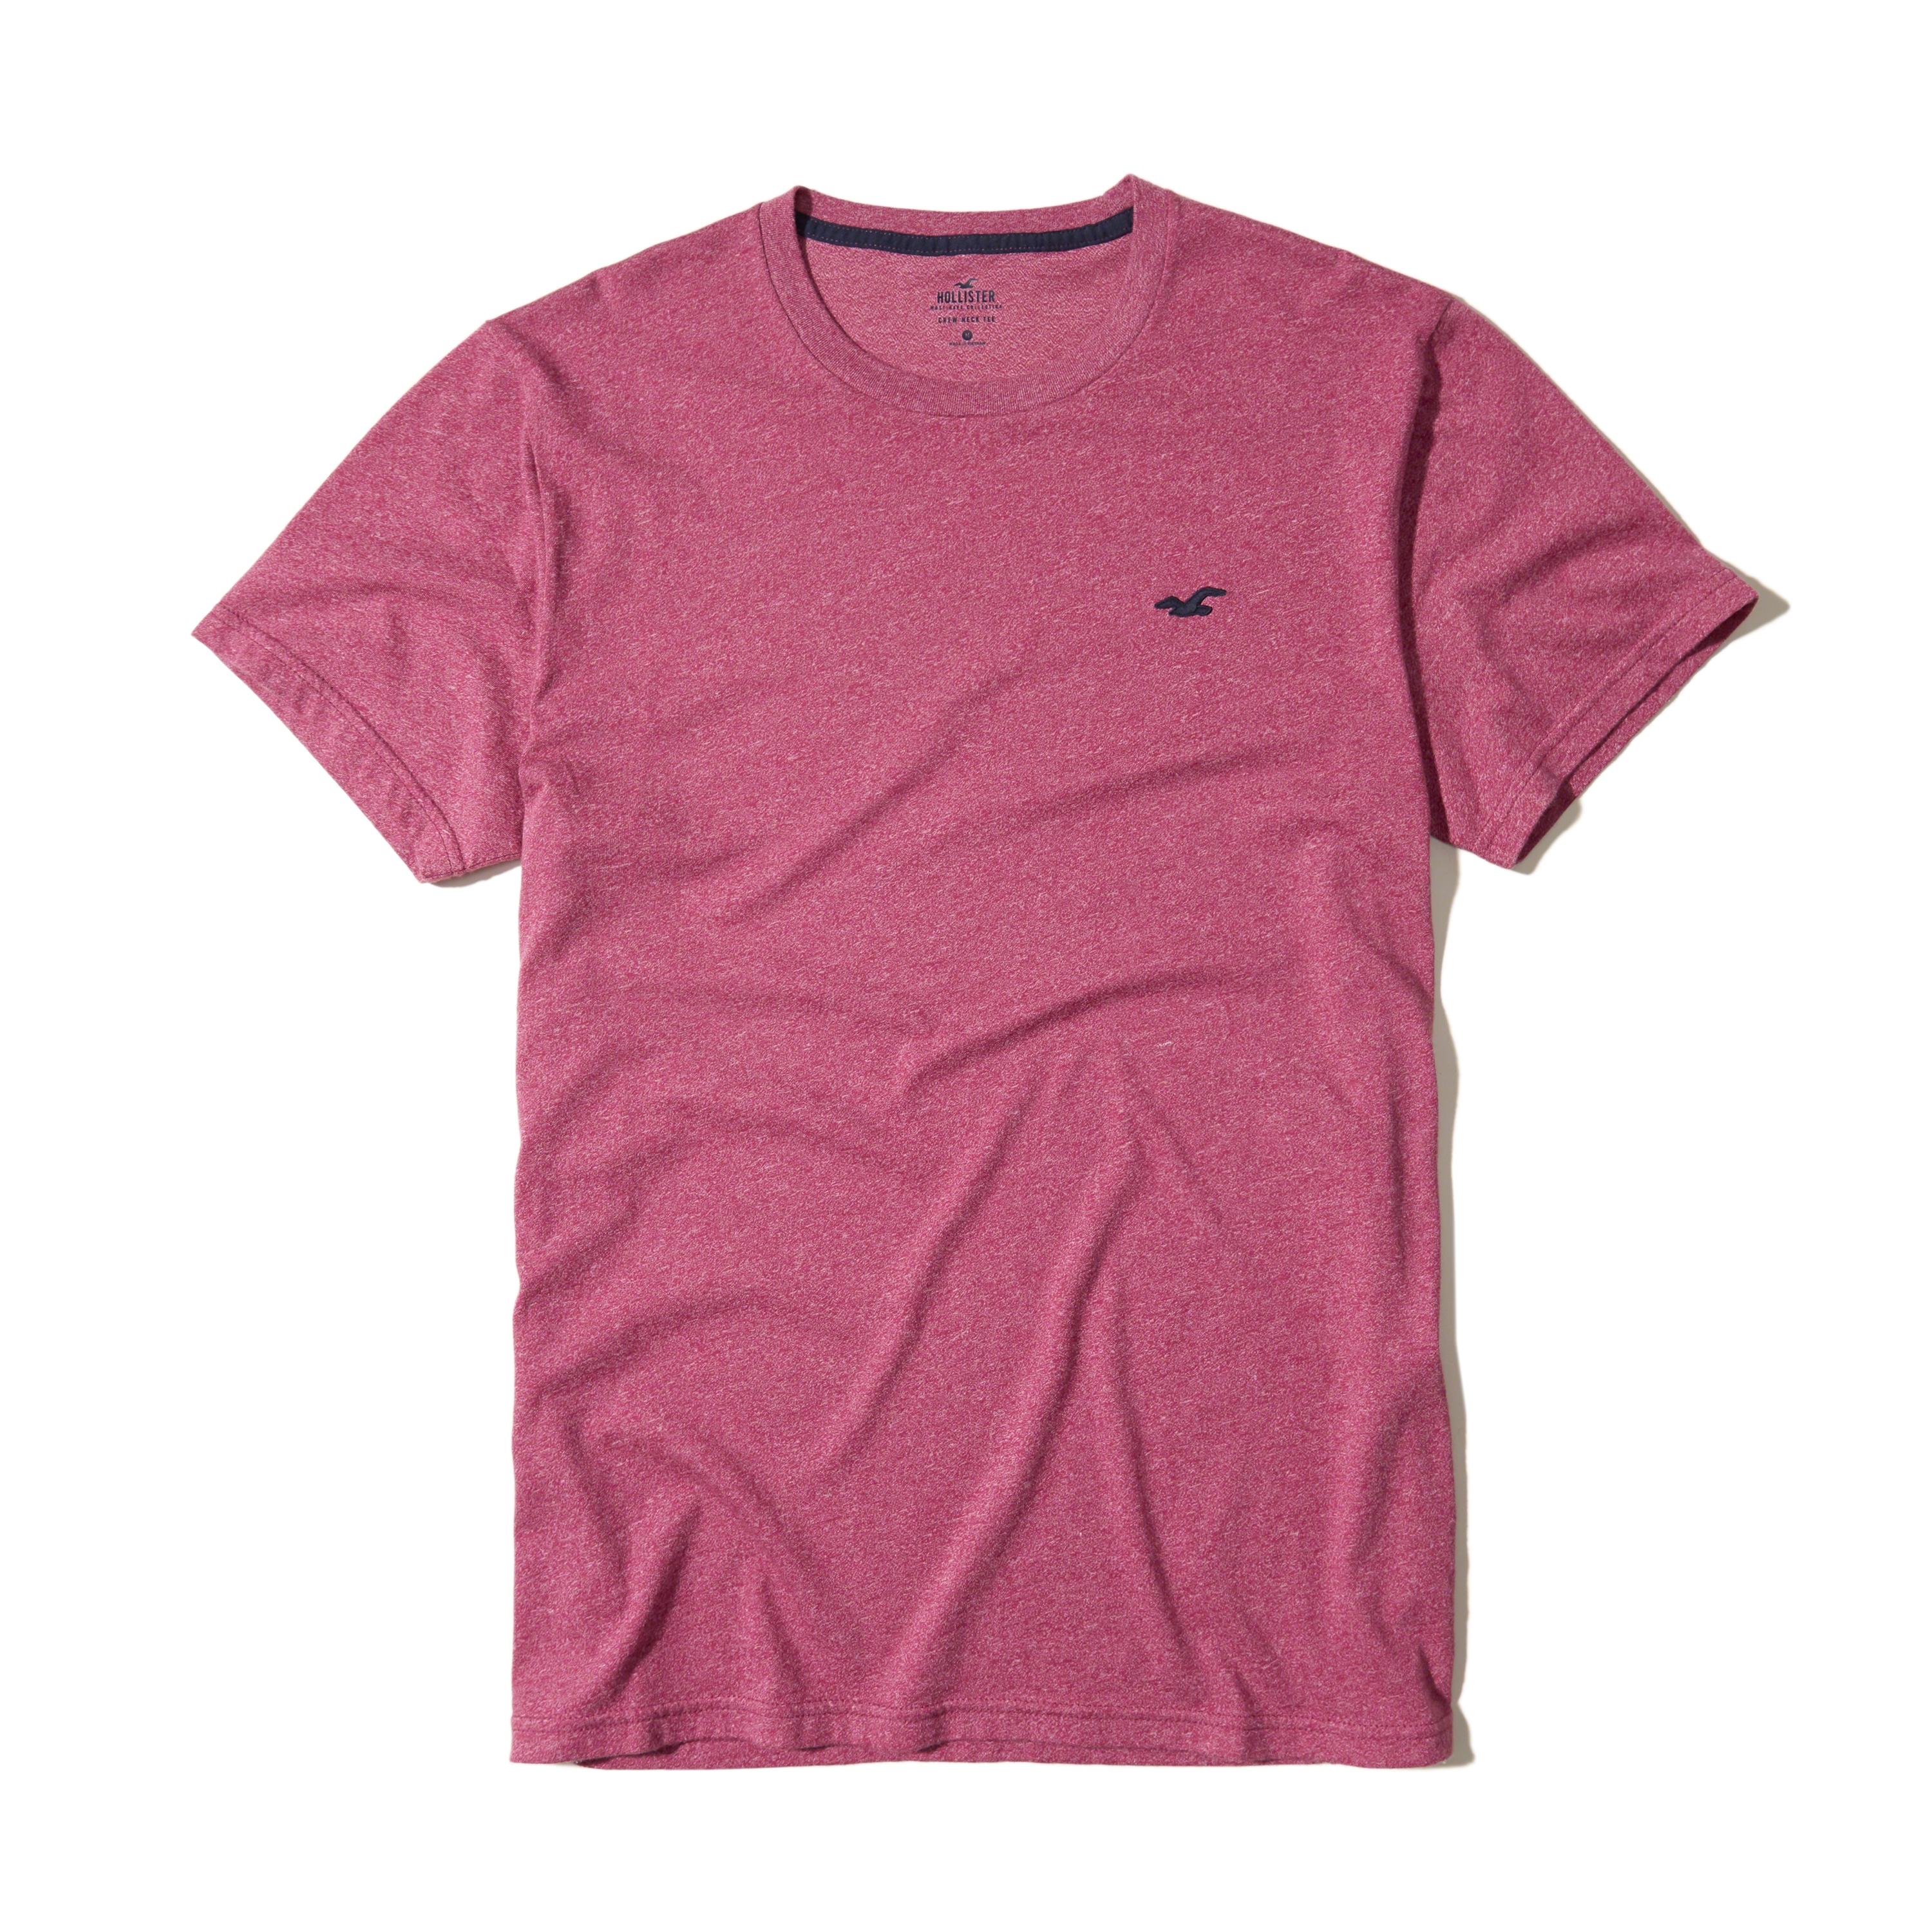 Lyst - Hollister Must-have Crew T-shirt in Pink for Men